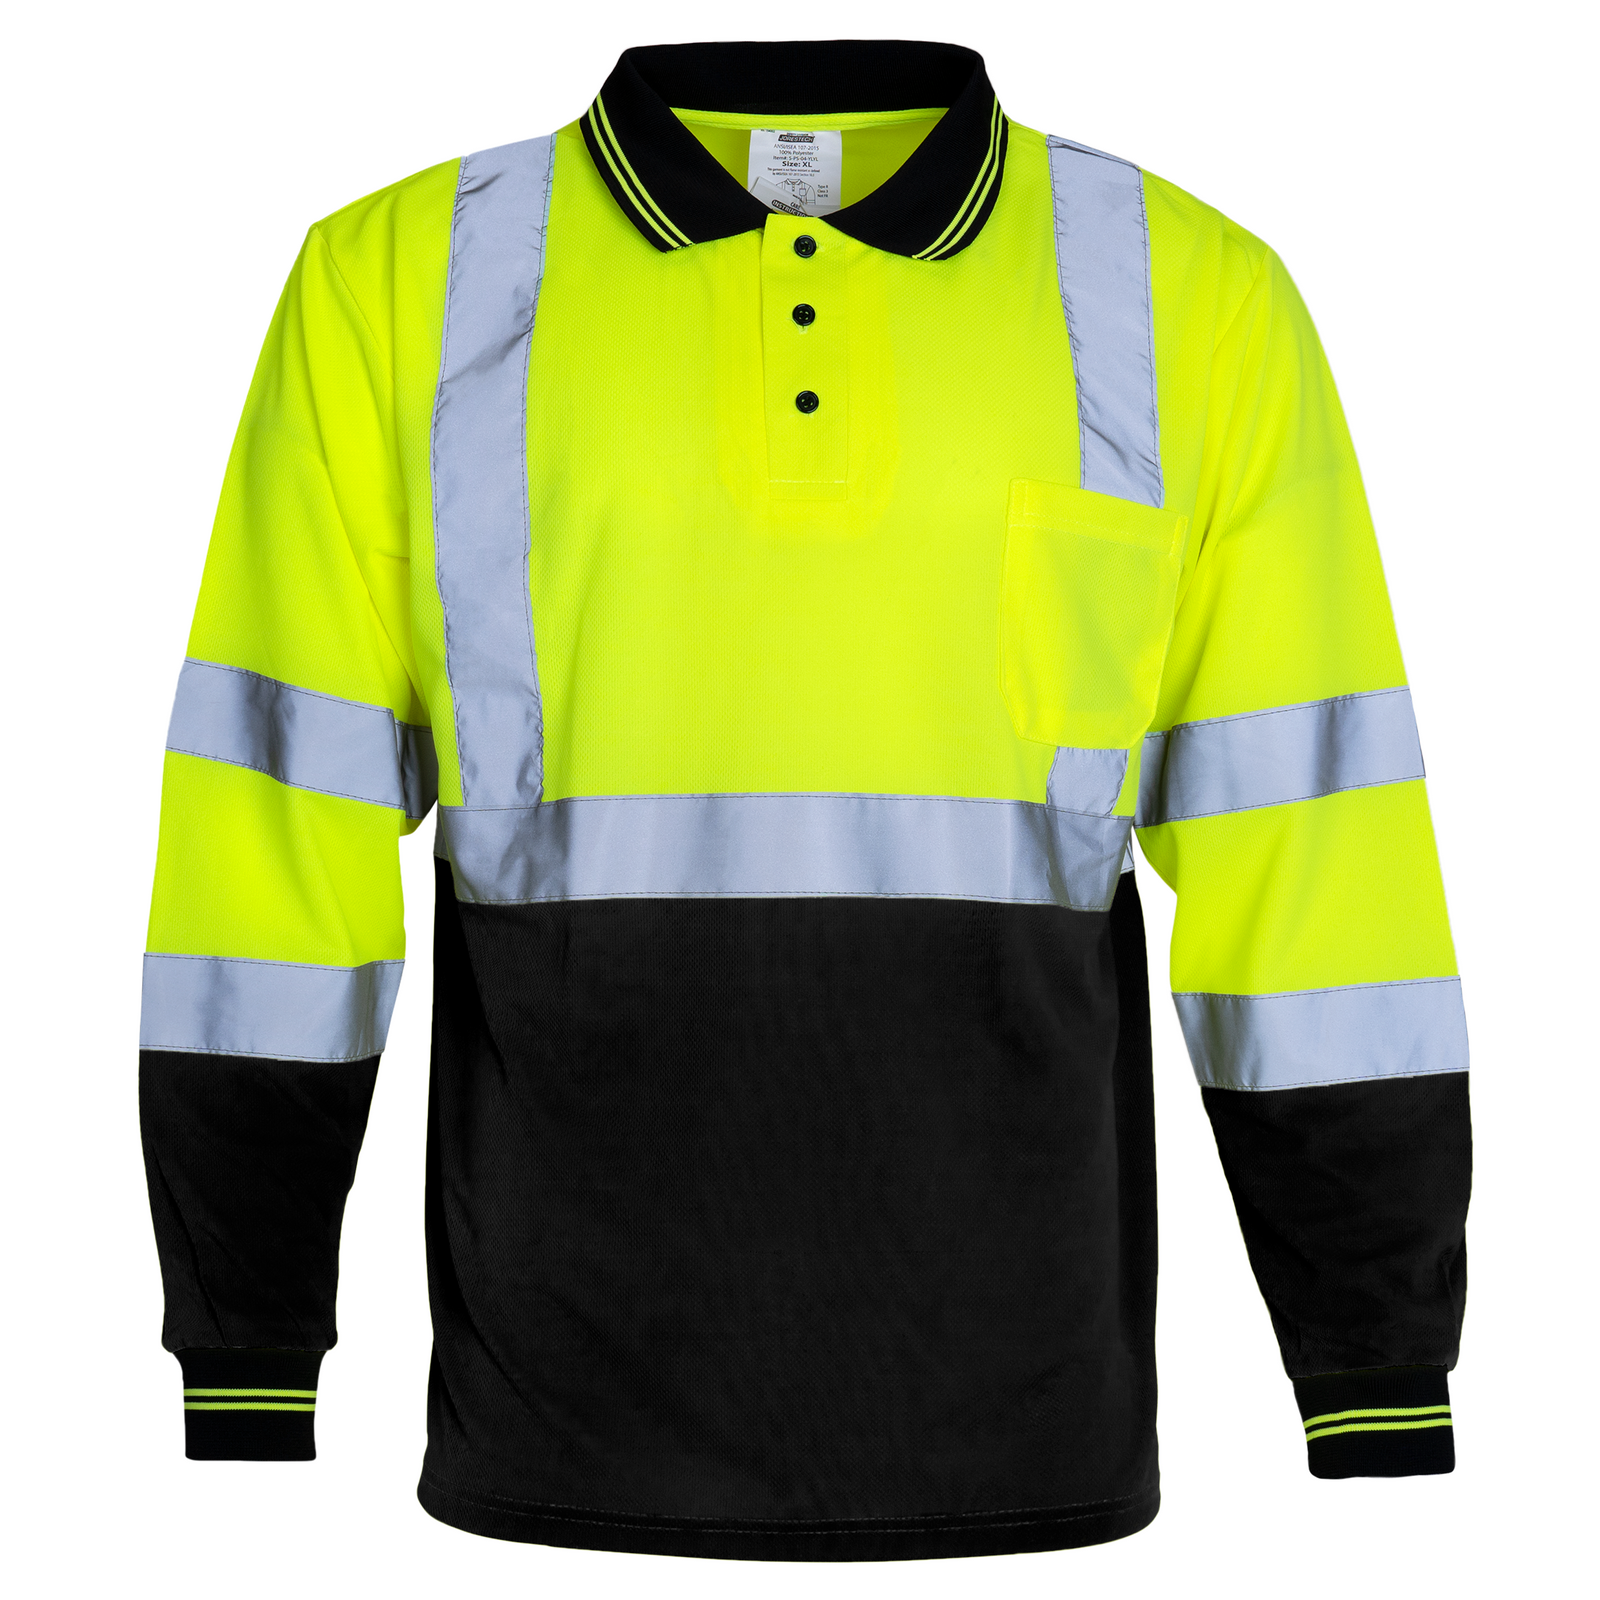 Black and yellow Hi Vis reflective safety long sleeve ANSI compliant polo shirt with dirt concealing fabric